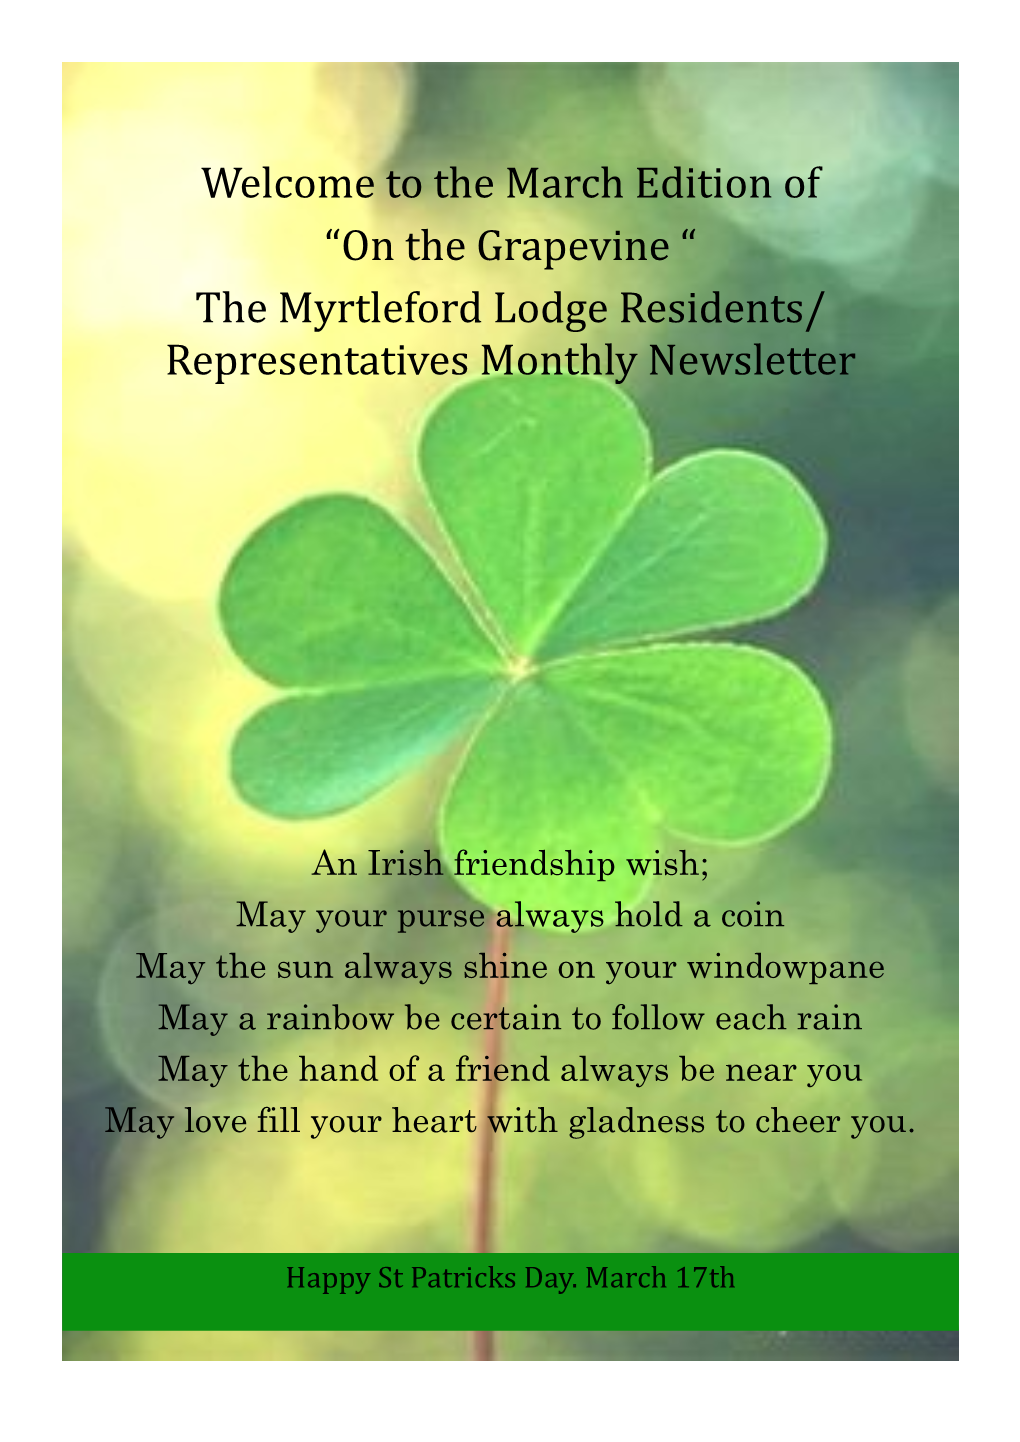 Welcome to the March Edition of “On the Grapevine “ the Myrtleford Lodge Residents/ Representatives Monthly Newsletter